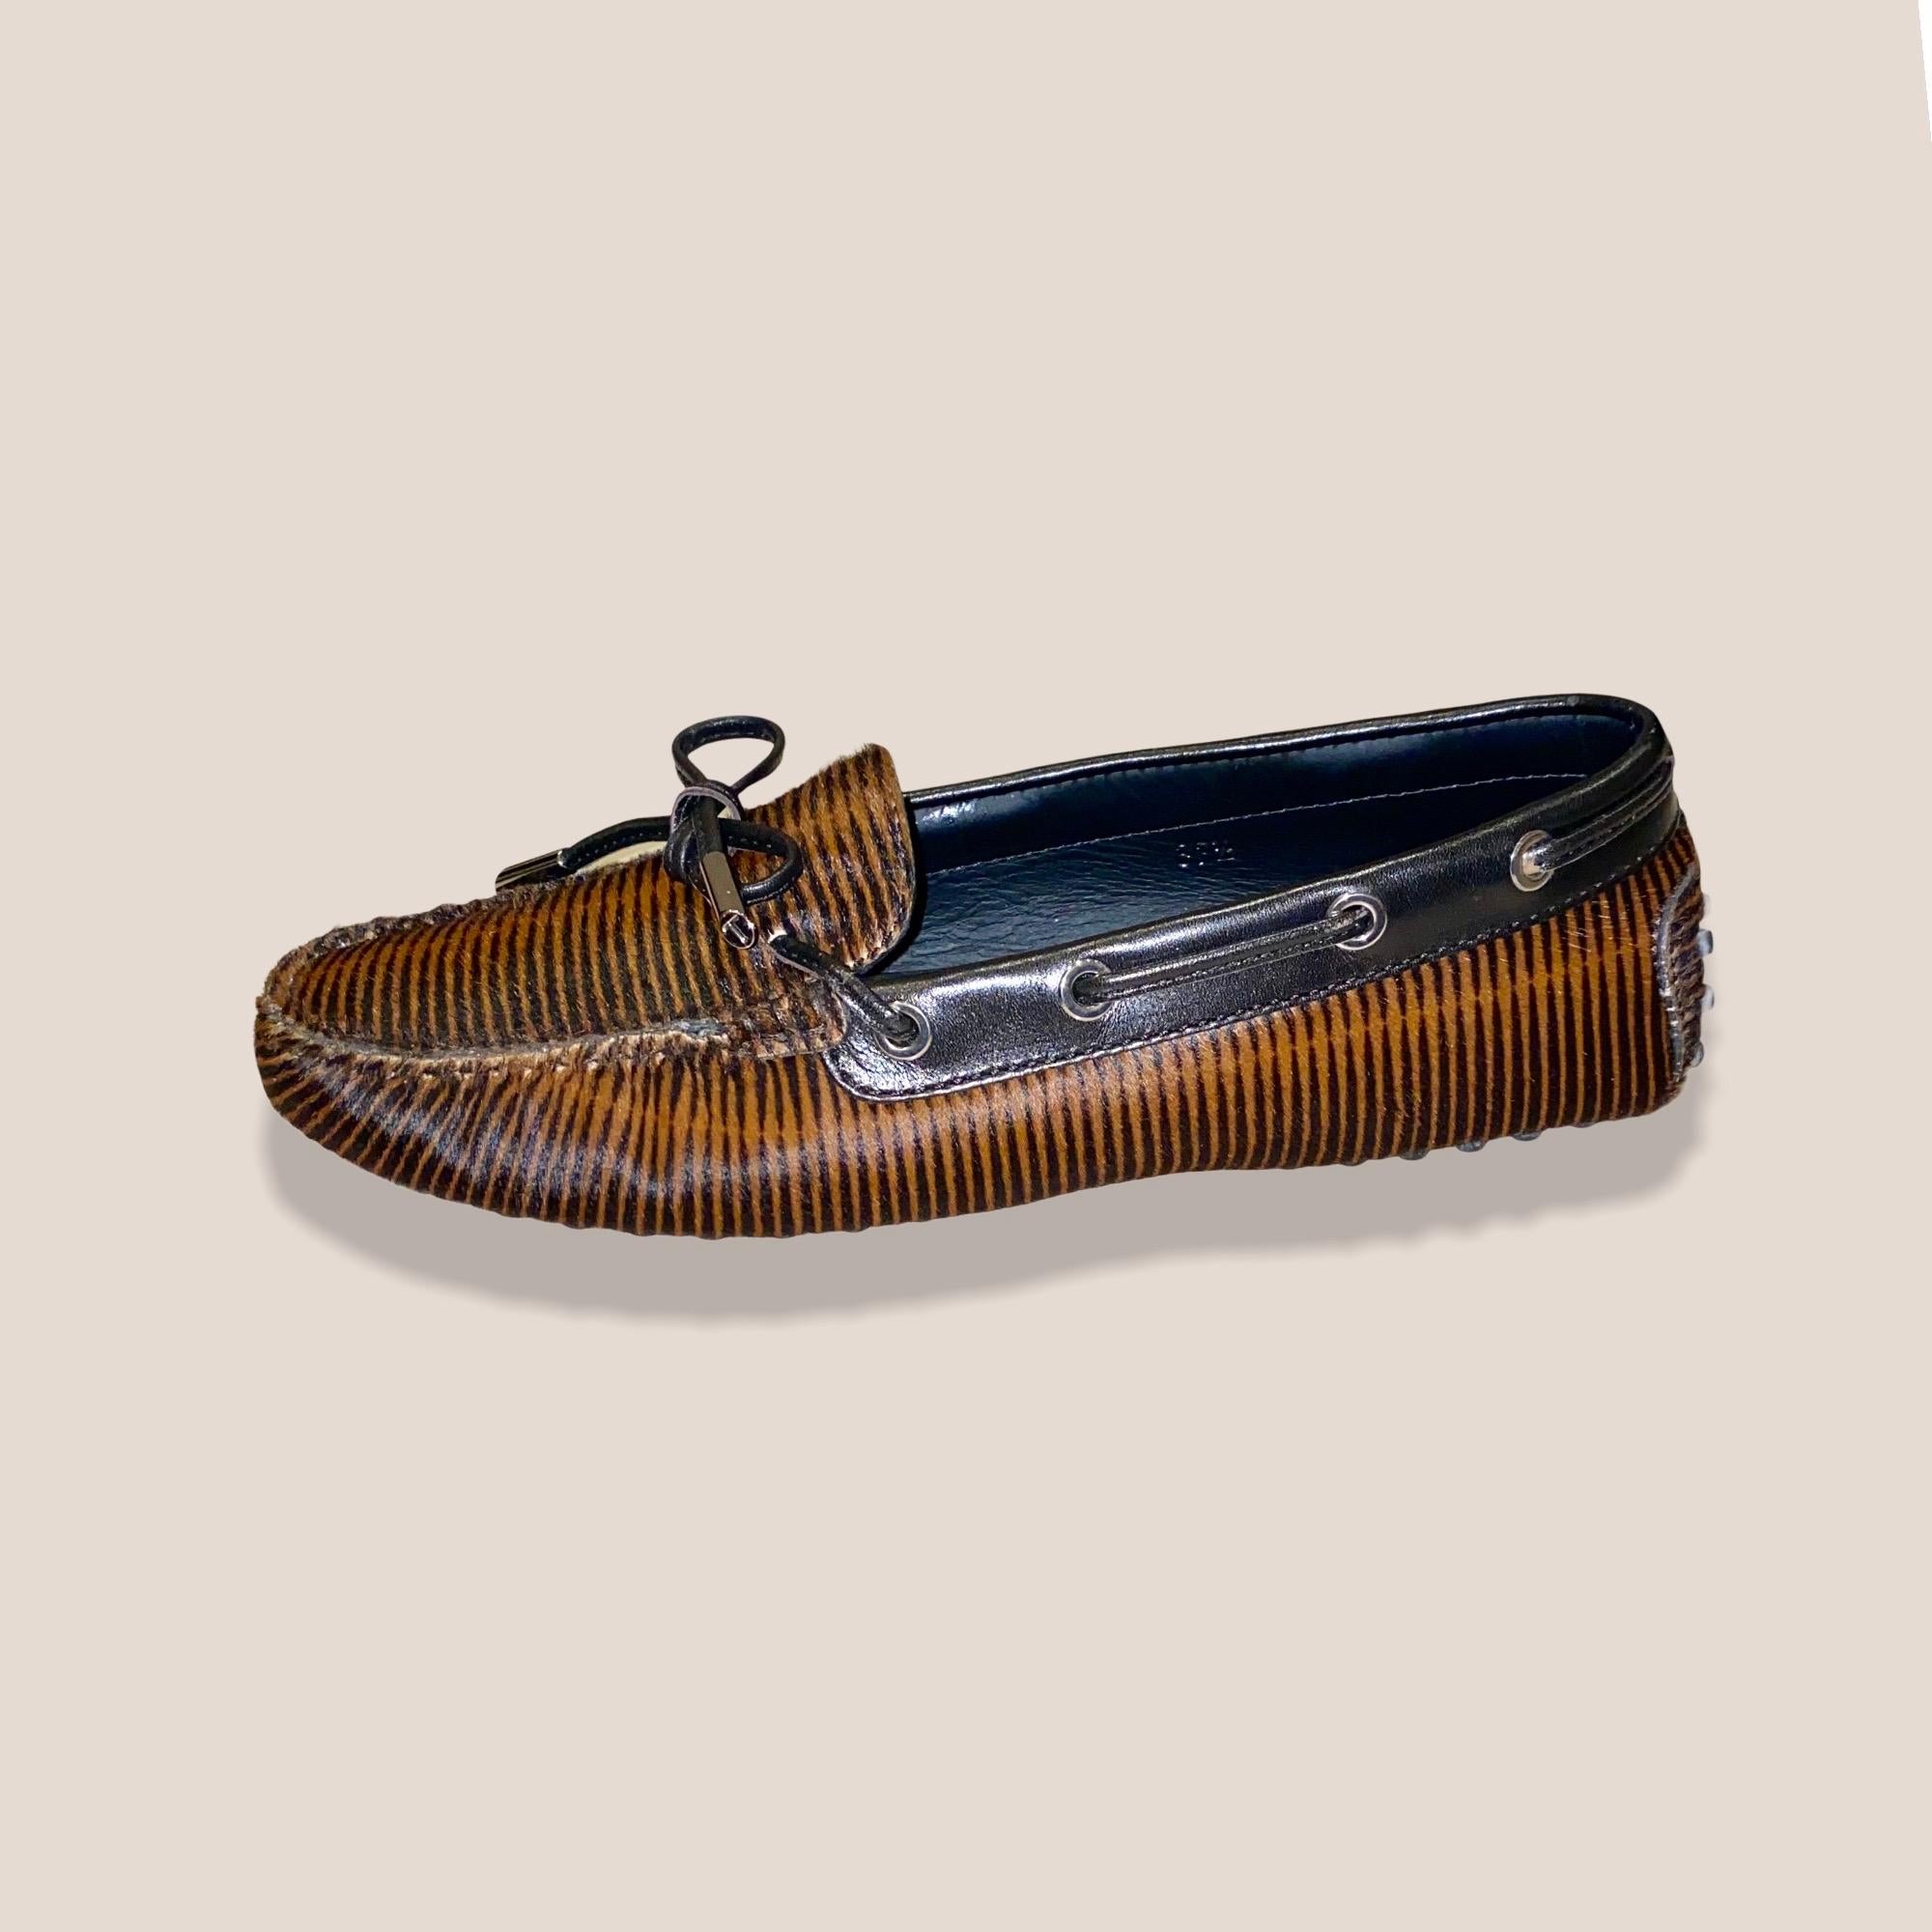 AMAZING

RARE RARE RARE

LIMITED EDITION TOD’S MOCCASINS LOAFERS


DETAILS:

Tod’s Gommini Driving Shoes
A signature piece that will last you for years
From an exclusive and limited real fur collection 
Hand-sewn
Gommino sole
Made in Italy
The Tod‘s